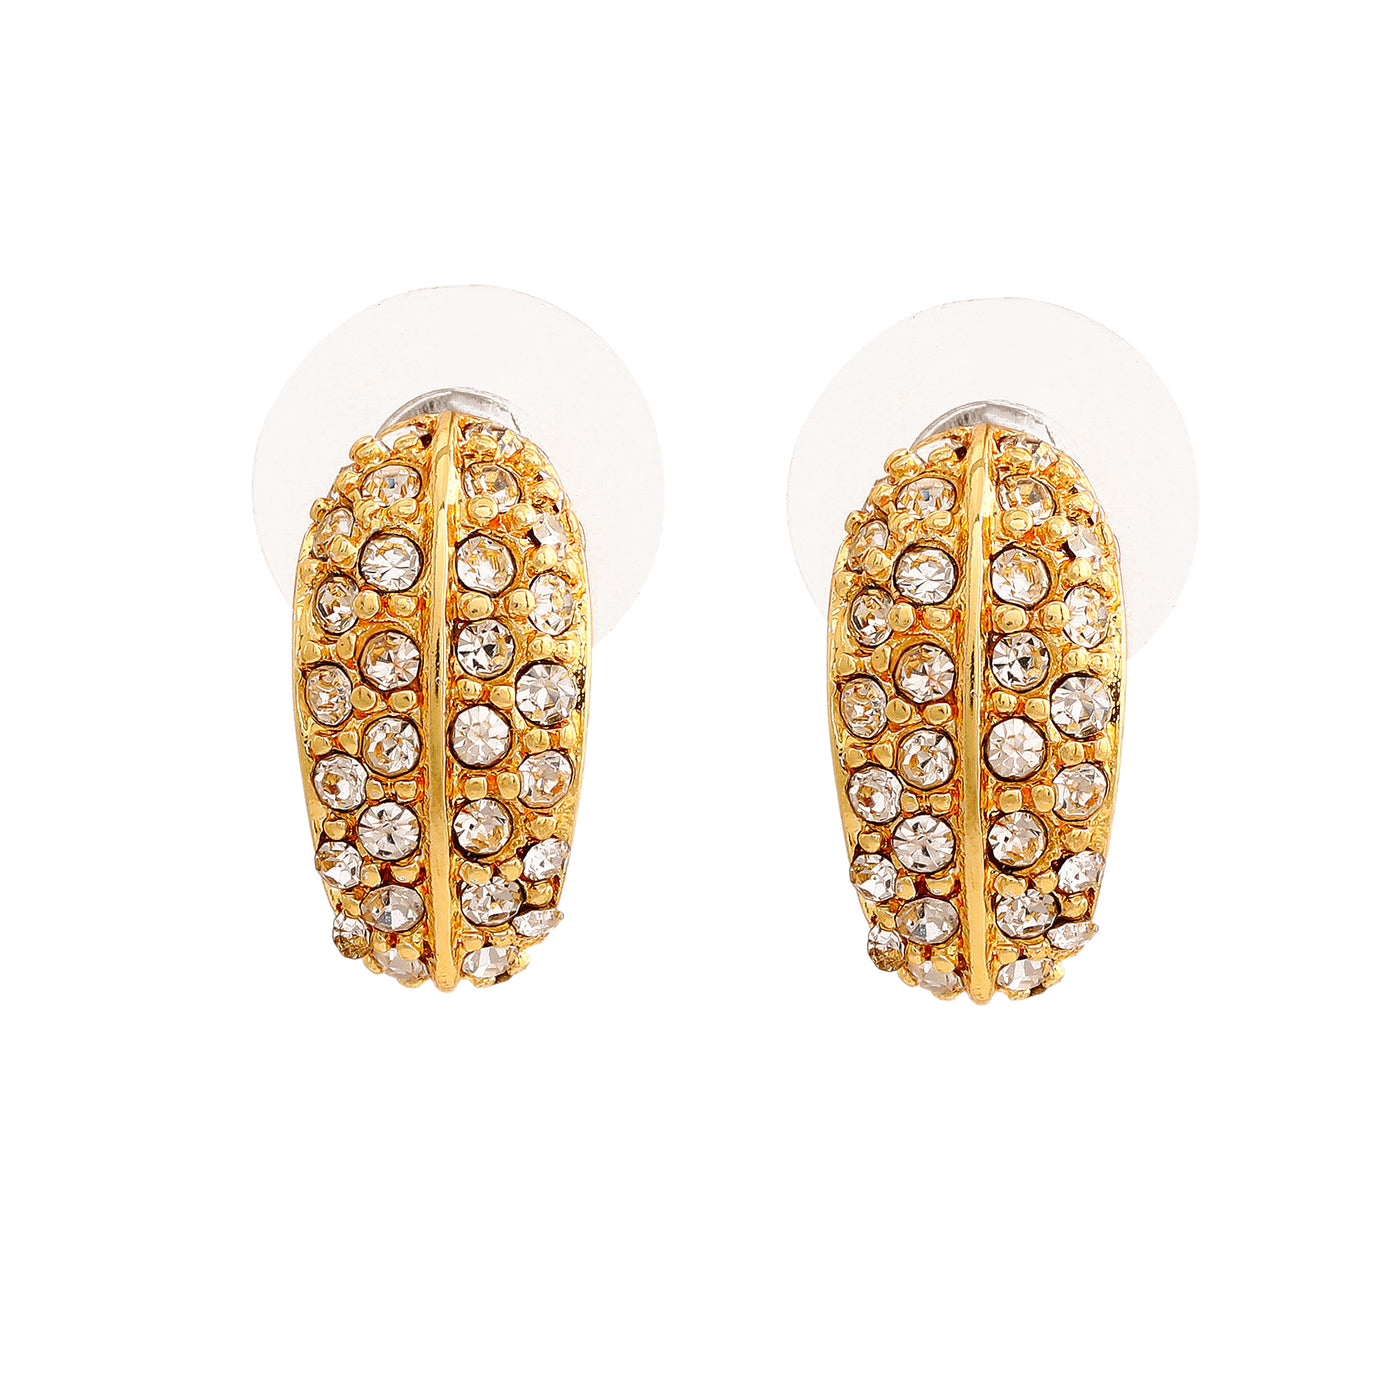 24Kt Gold Plated Candy Earring with White Crystals